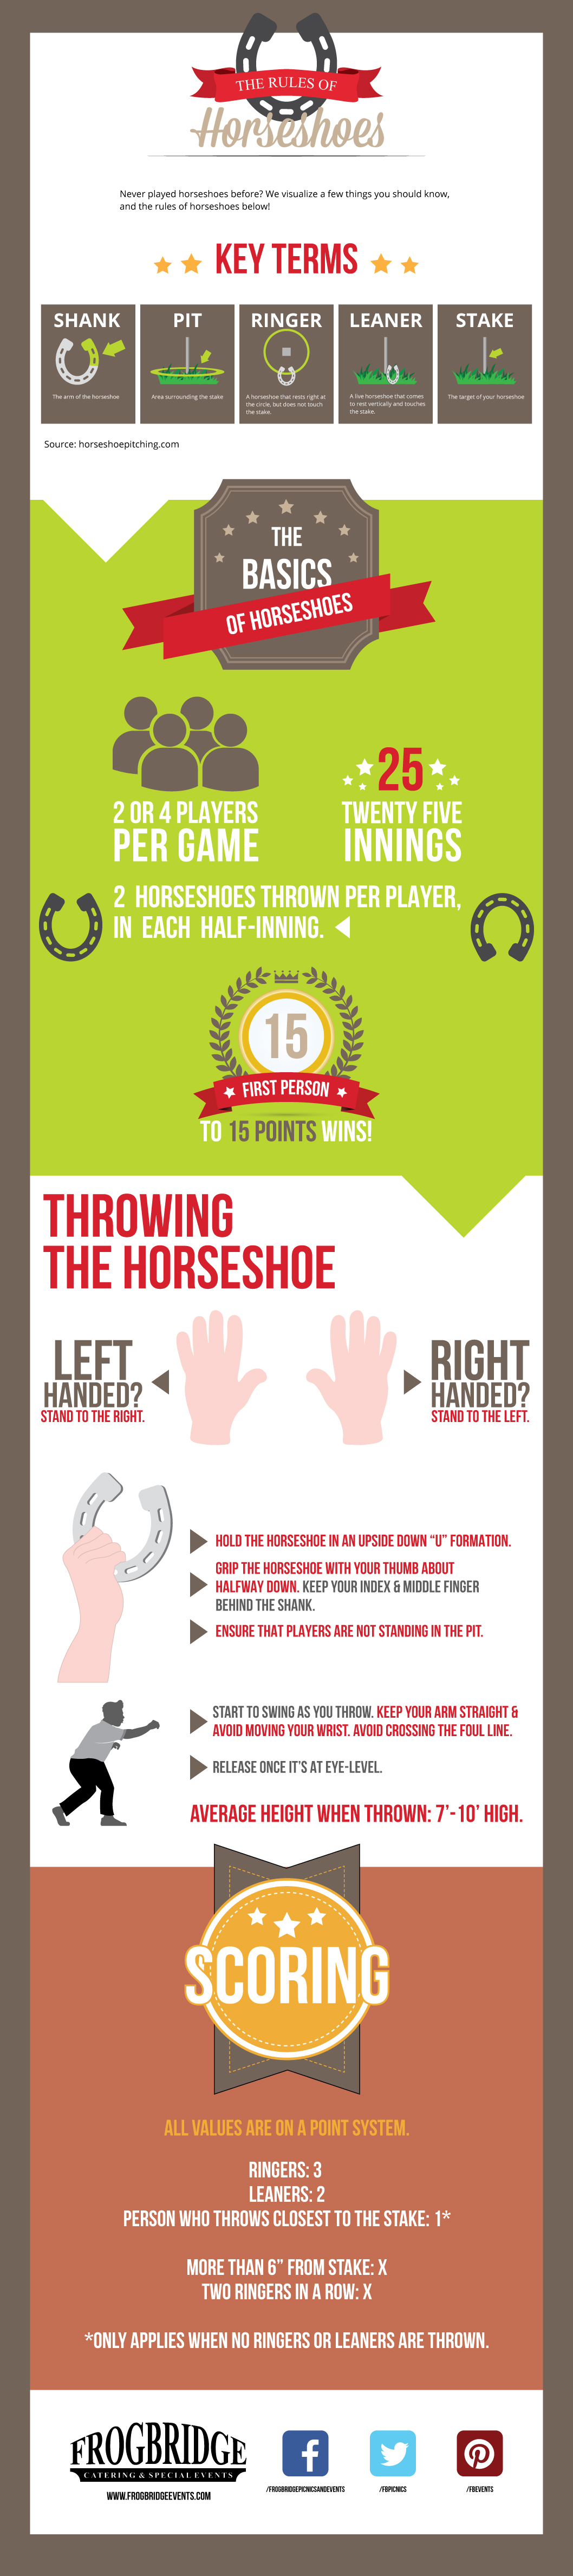 The Rules of Horseshoes